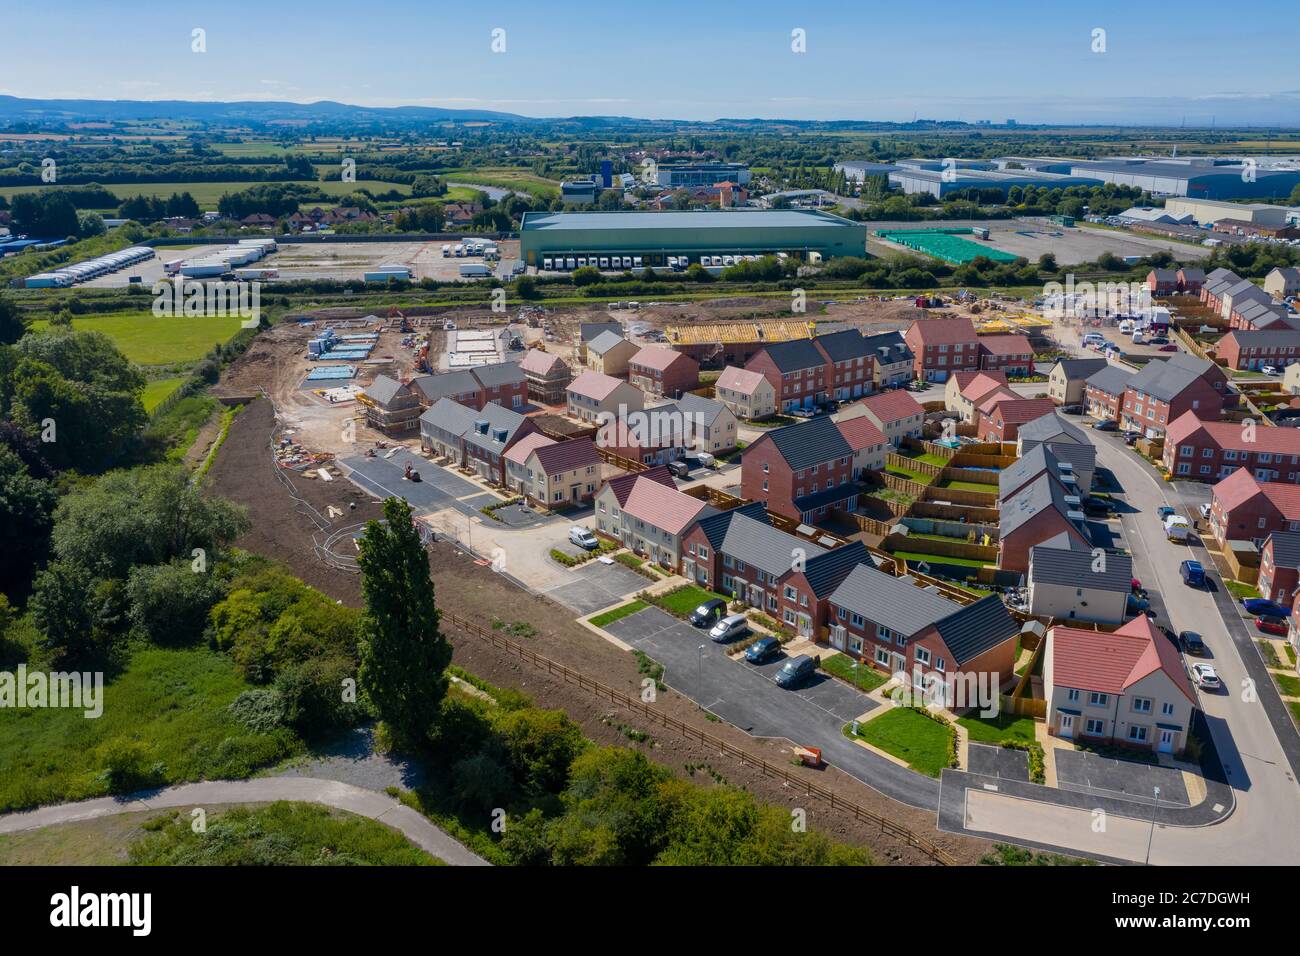 Aerial view of new houses being built / constructed by Taylet wimpy in Bridgwater, Somerset UK. Stock Photo